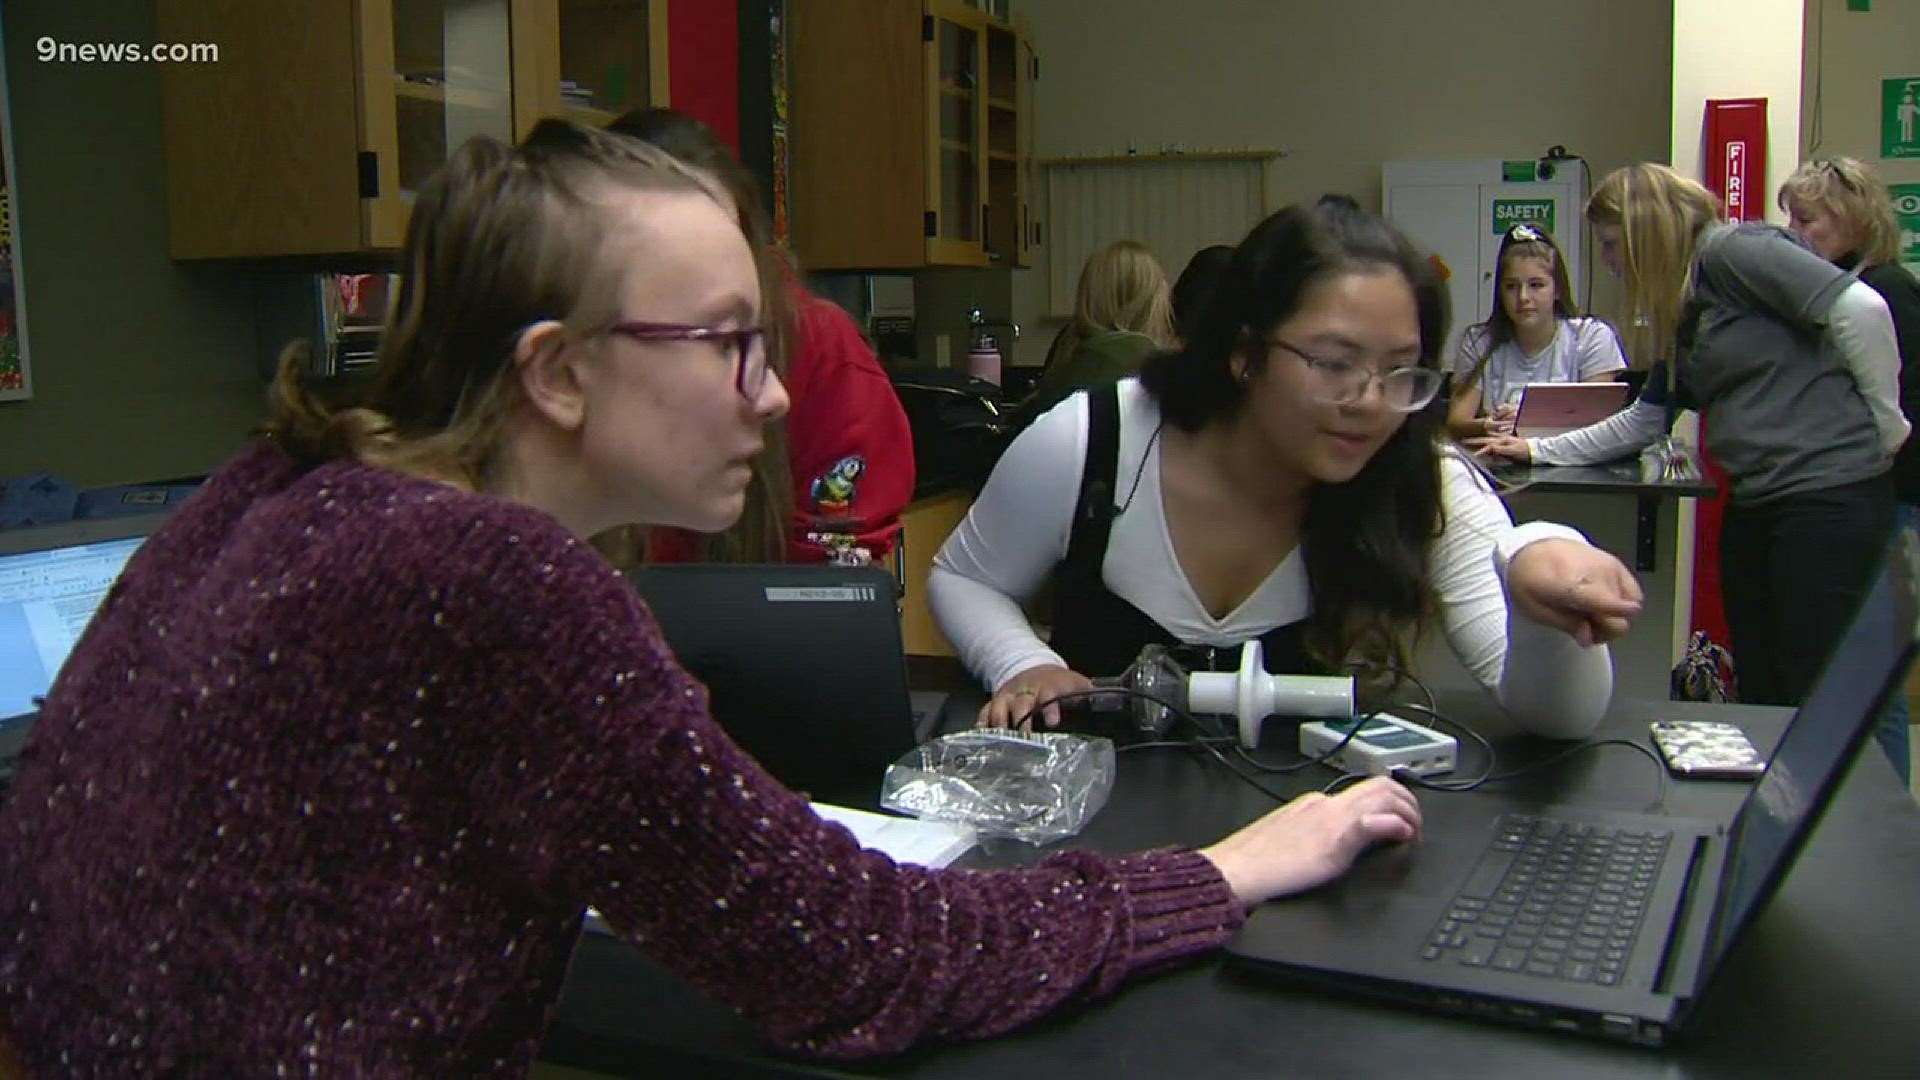 There's a biomedical program at Bear Creek High School which is part of an effort to get students interested in STEM careers.